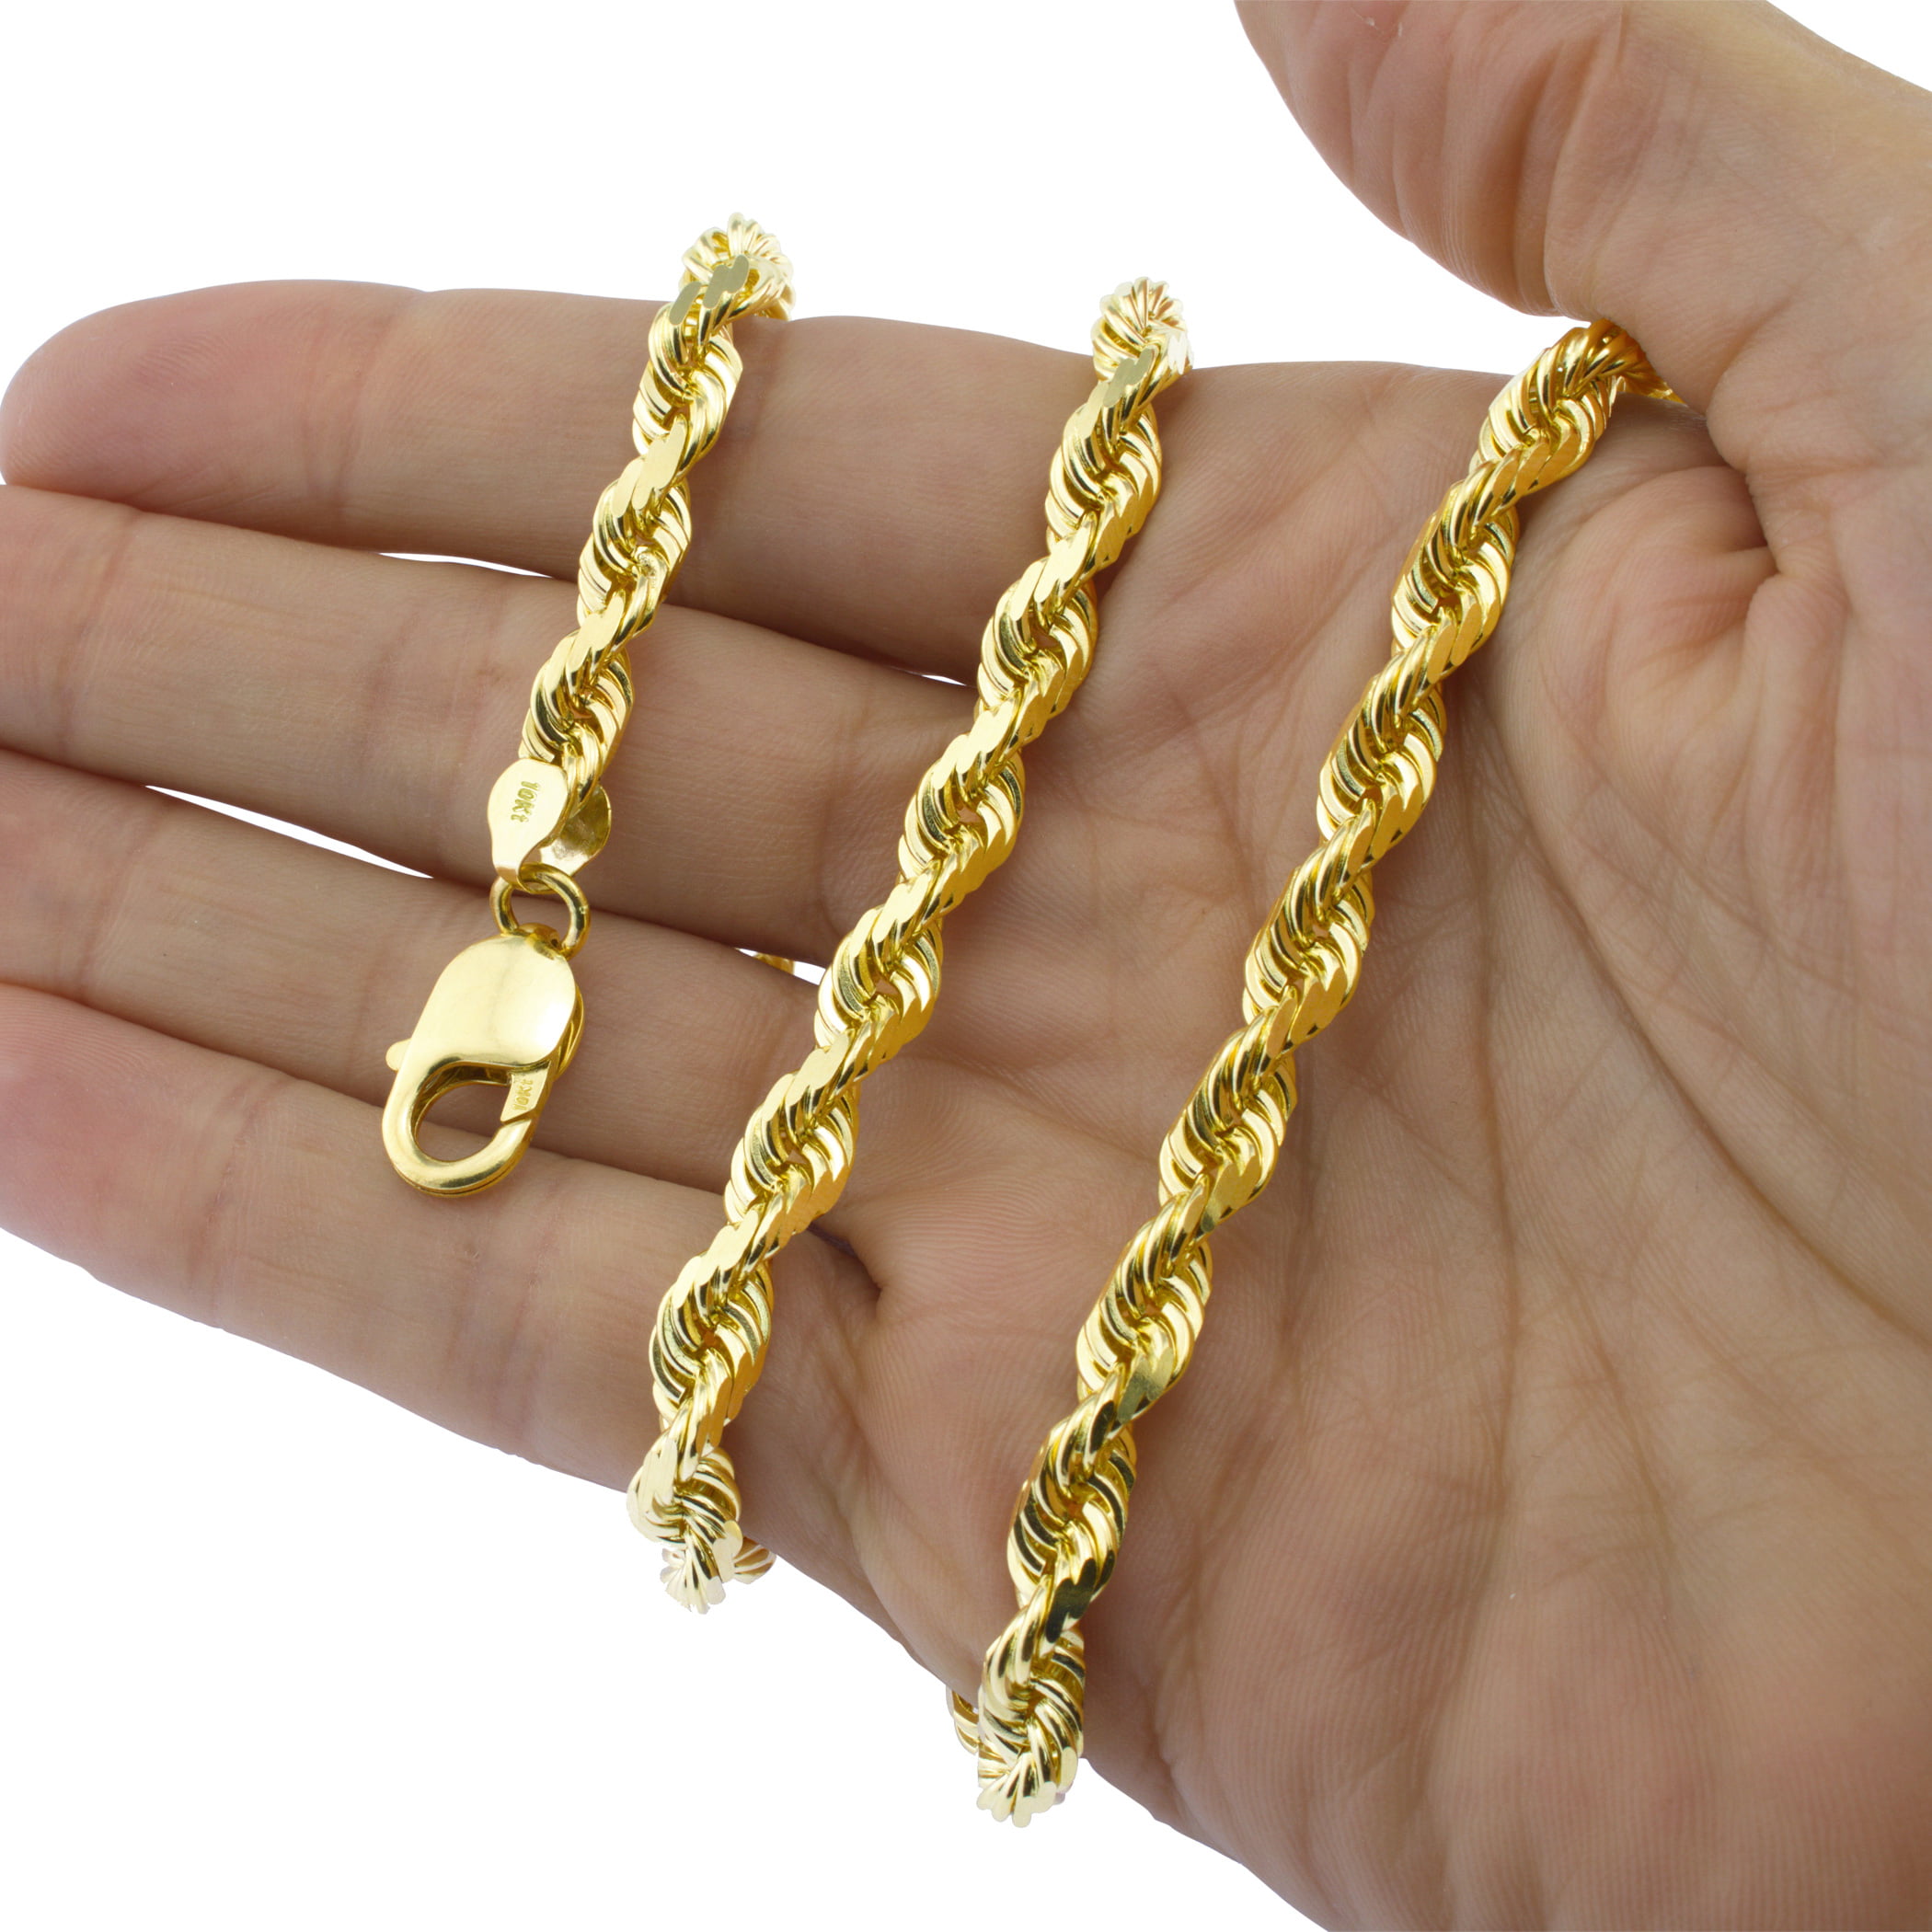 Jewel Tie 10k Gold Hollow Figaro Chain Bracelet with Lobster Clasp 4.6mm 